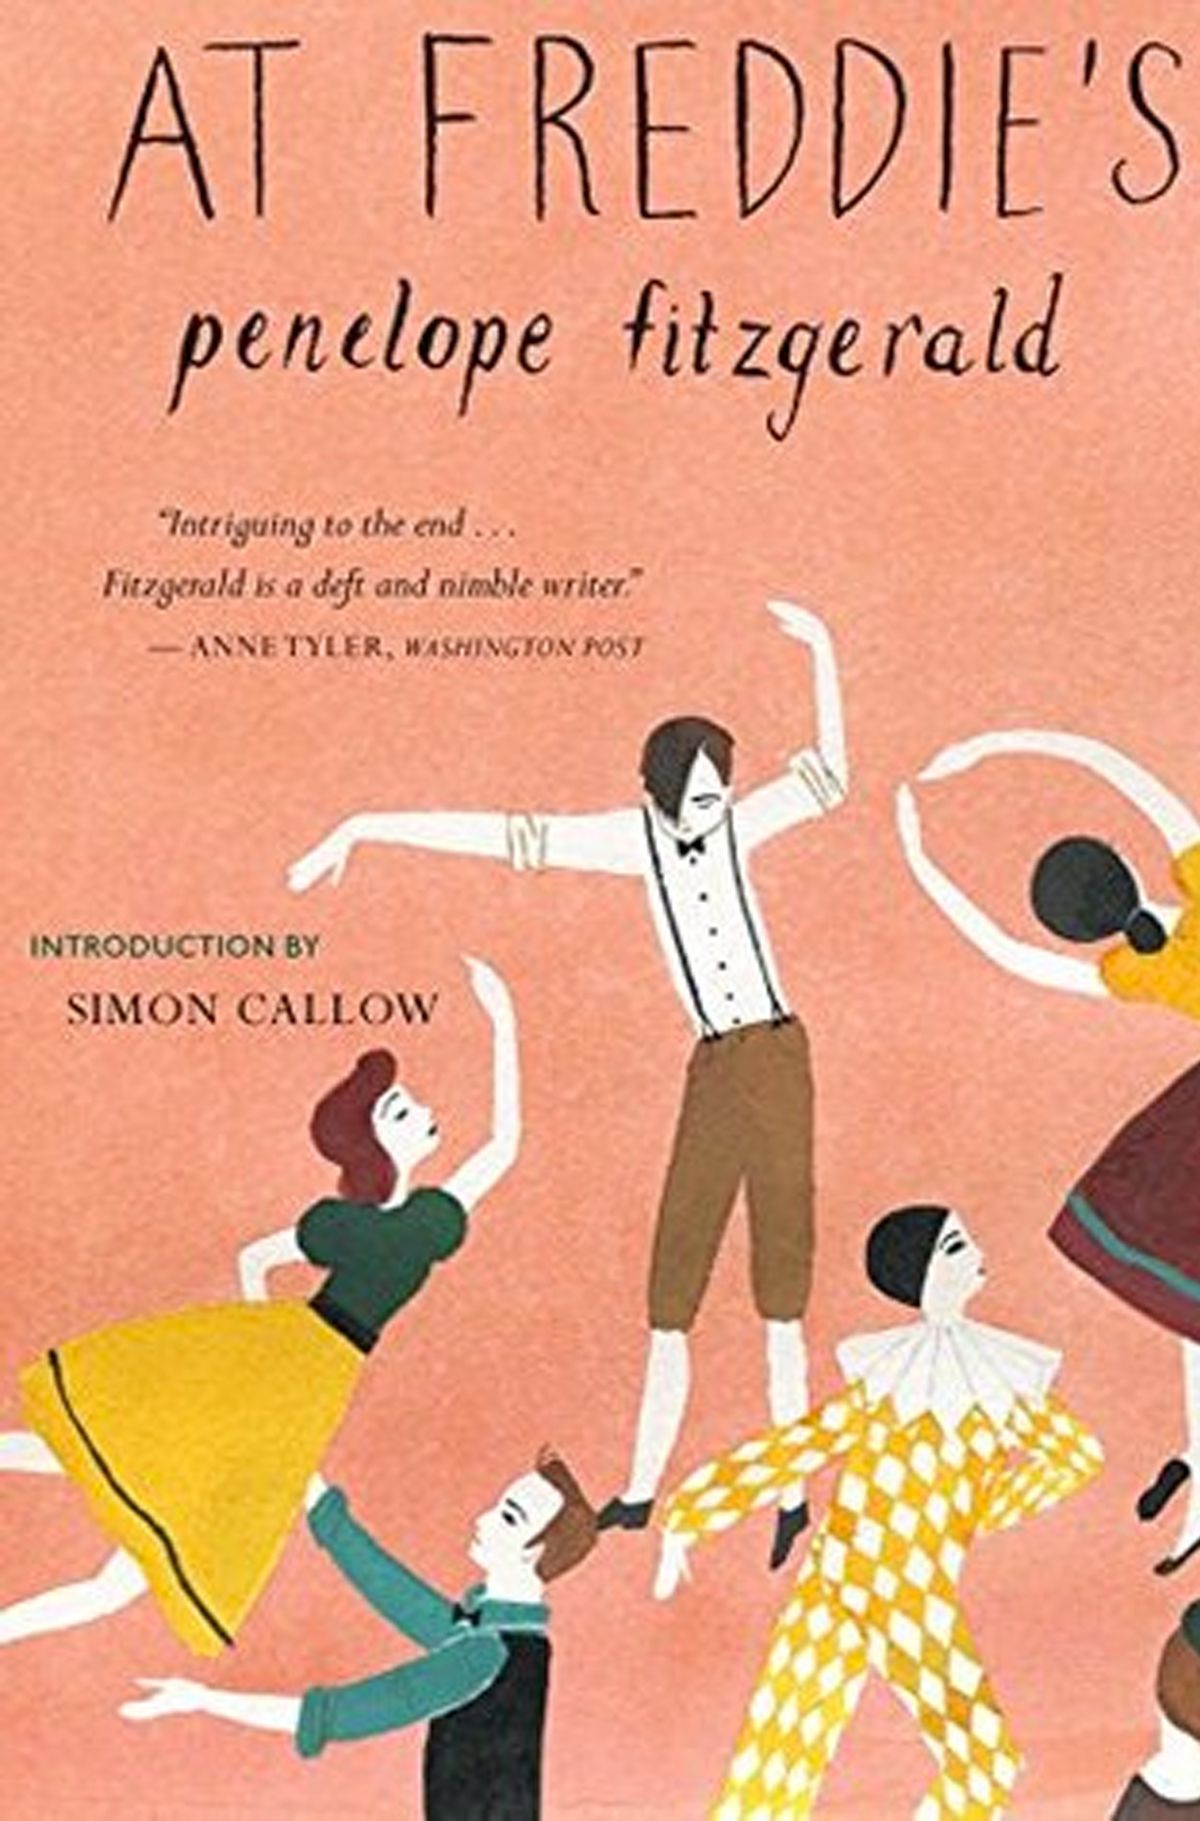 A book about London, At Freddie's by Penelope Fitzgerald